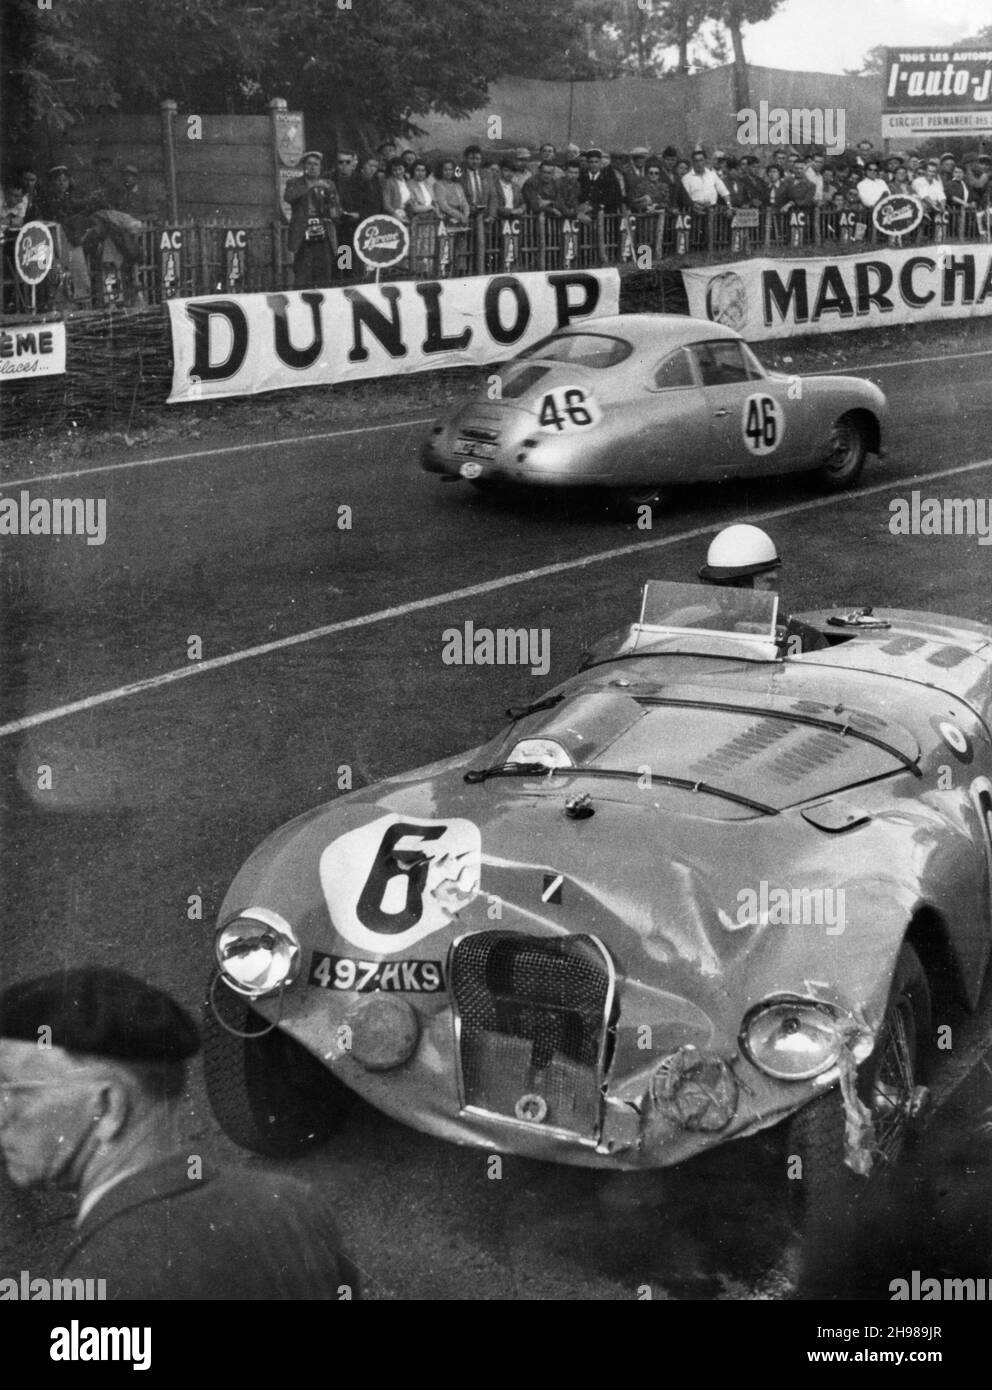 Crashed Talbot Lago of Andre Chambas and Charles de Cortanze, Le Mans 24 Hour Race, France, 1953. The Porsche 356 of Gonzague Olivier and Eugene Martin passes in the background. Stock Photo